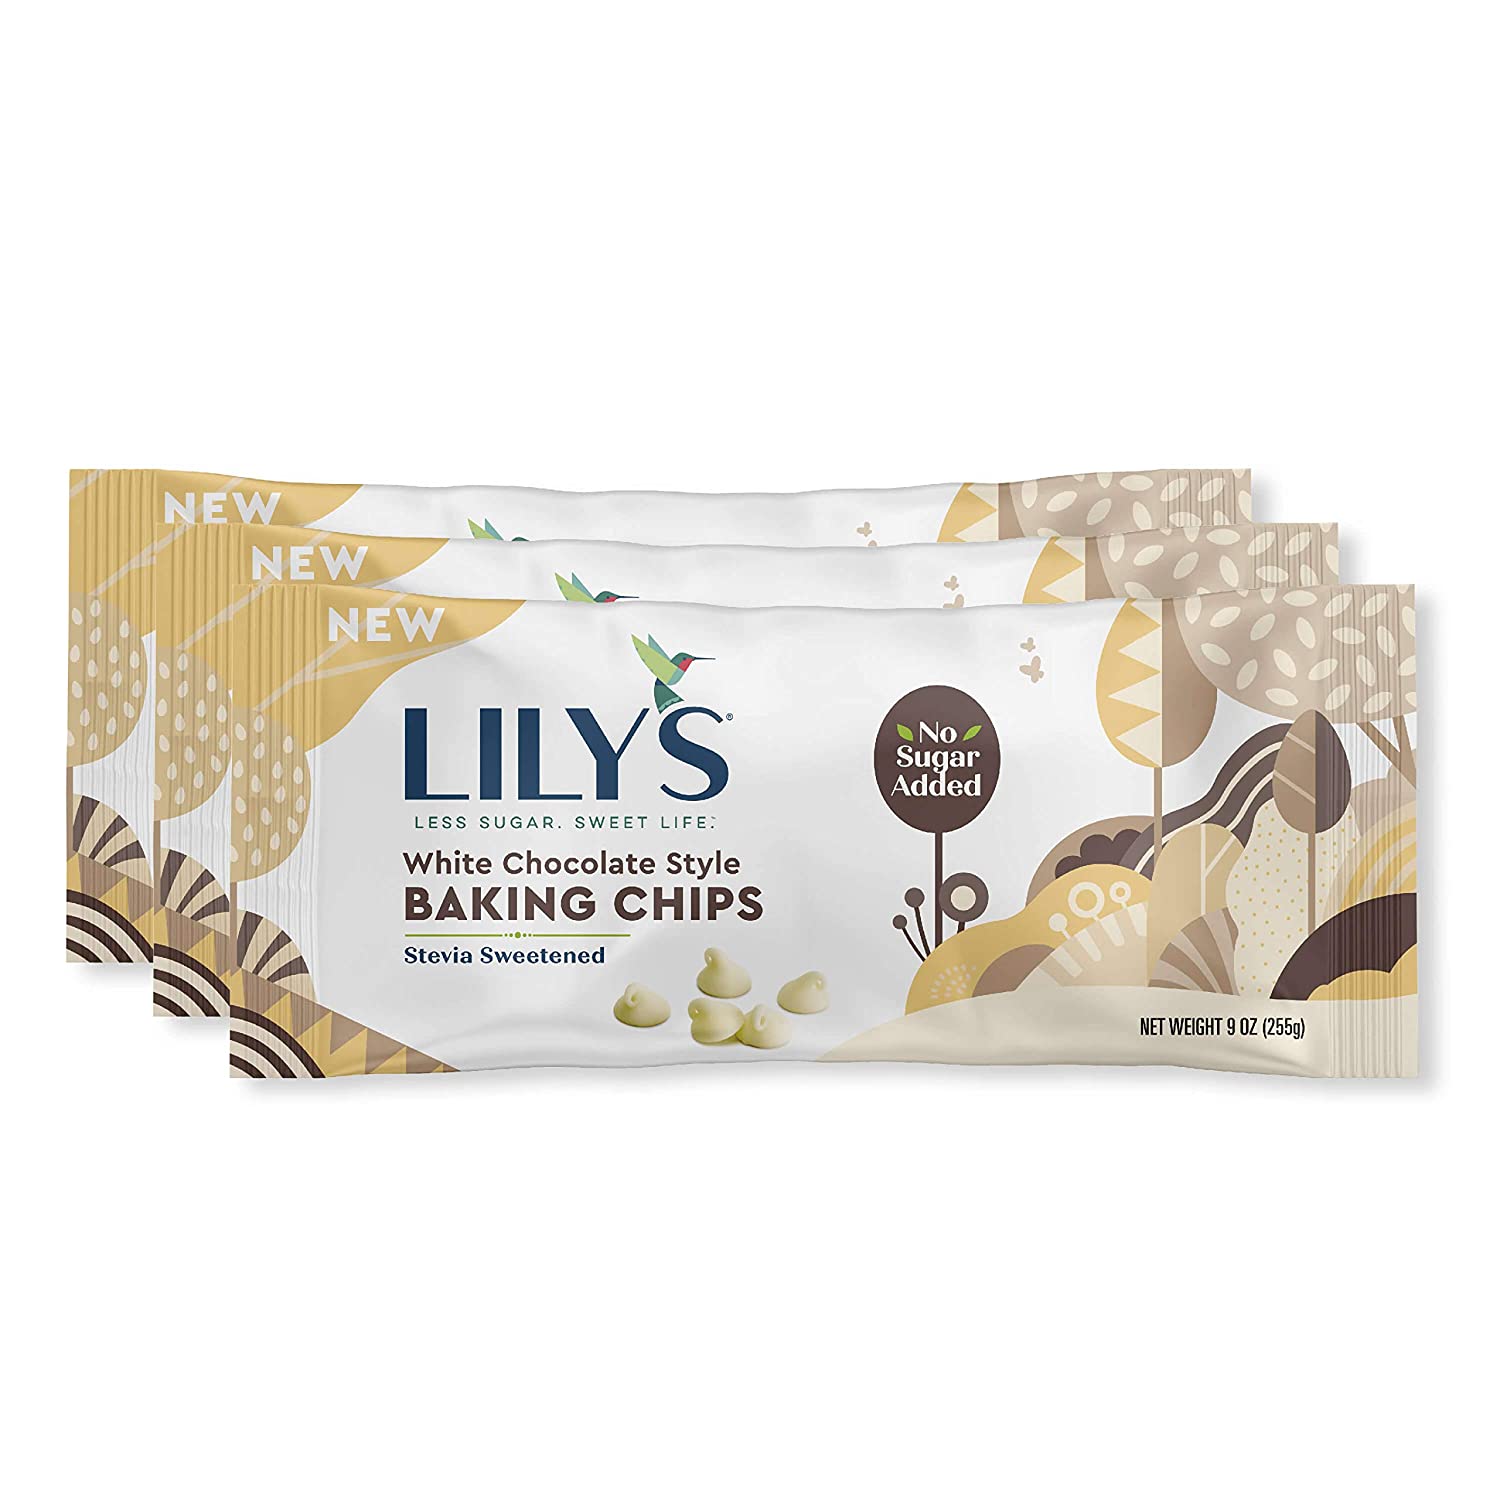 Lily's Keto White Chocolate Baking Chips